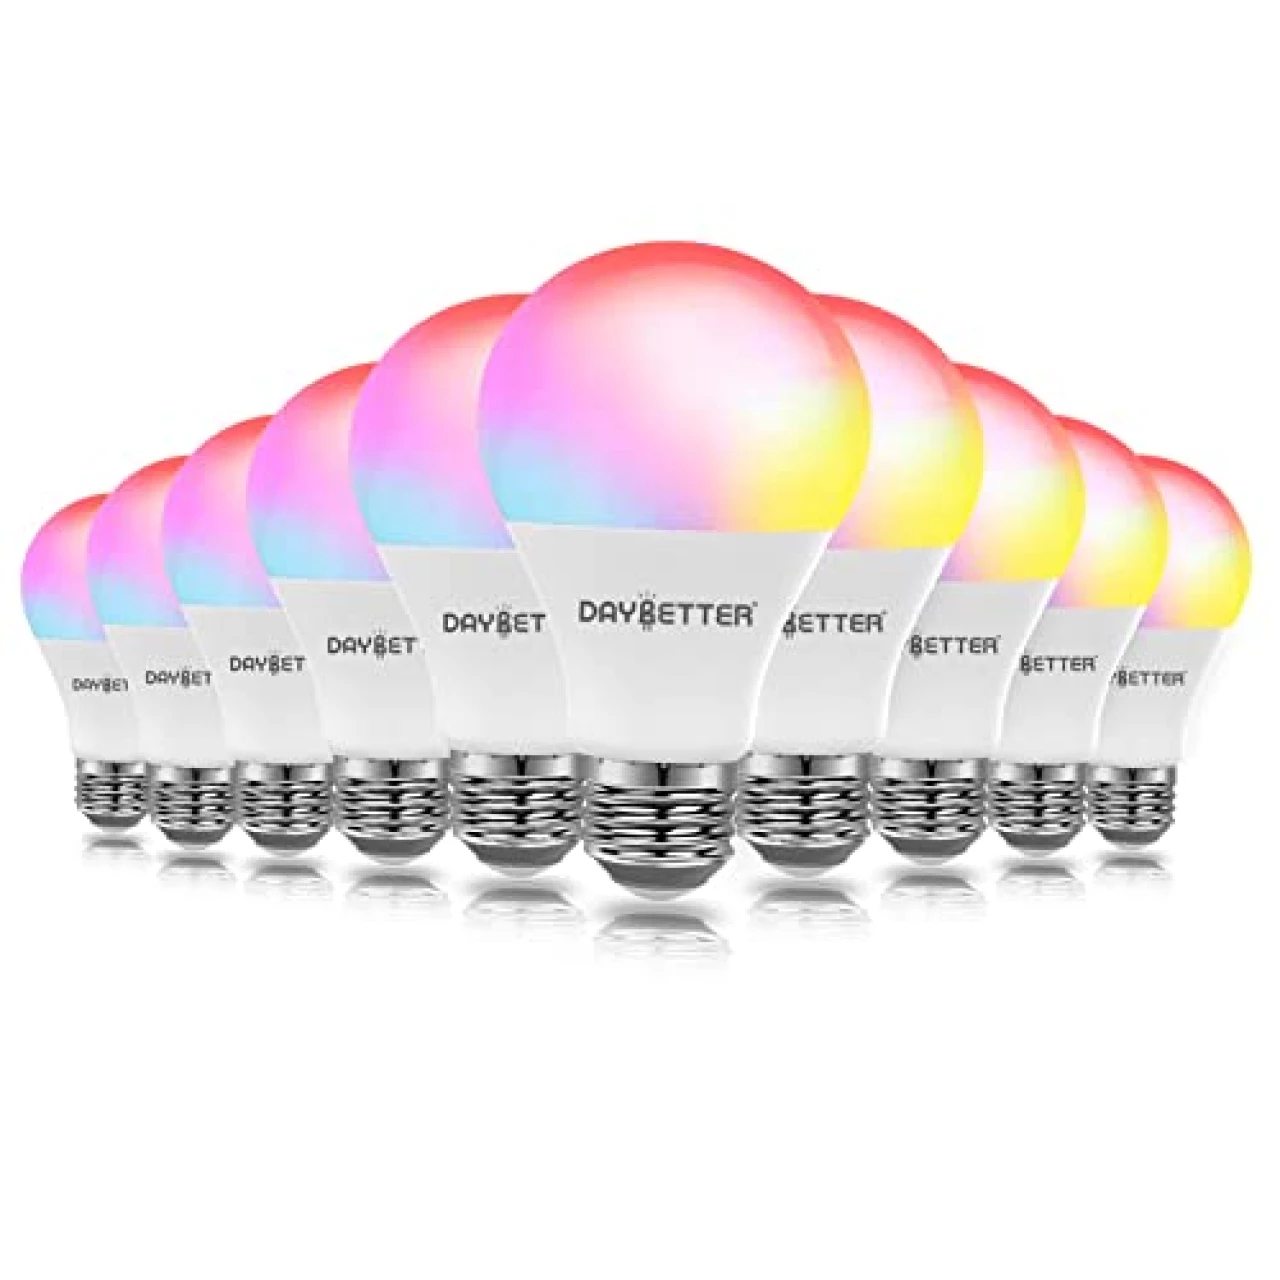 DAYBETTER Smart Light Bulbs, Alexa Light Bulb, WiFi Light Bulbs, RGBCW Color Changing Light Bulb A19 9W 800LM, Smart Bulbs that Work with Alexa &amp; Google Assistant, 2.4Ghz only, No Hub Required,10 Pack